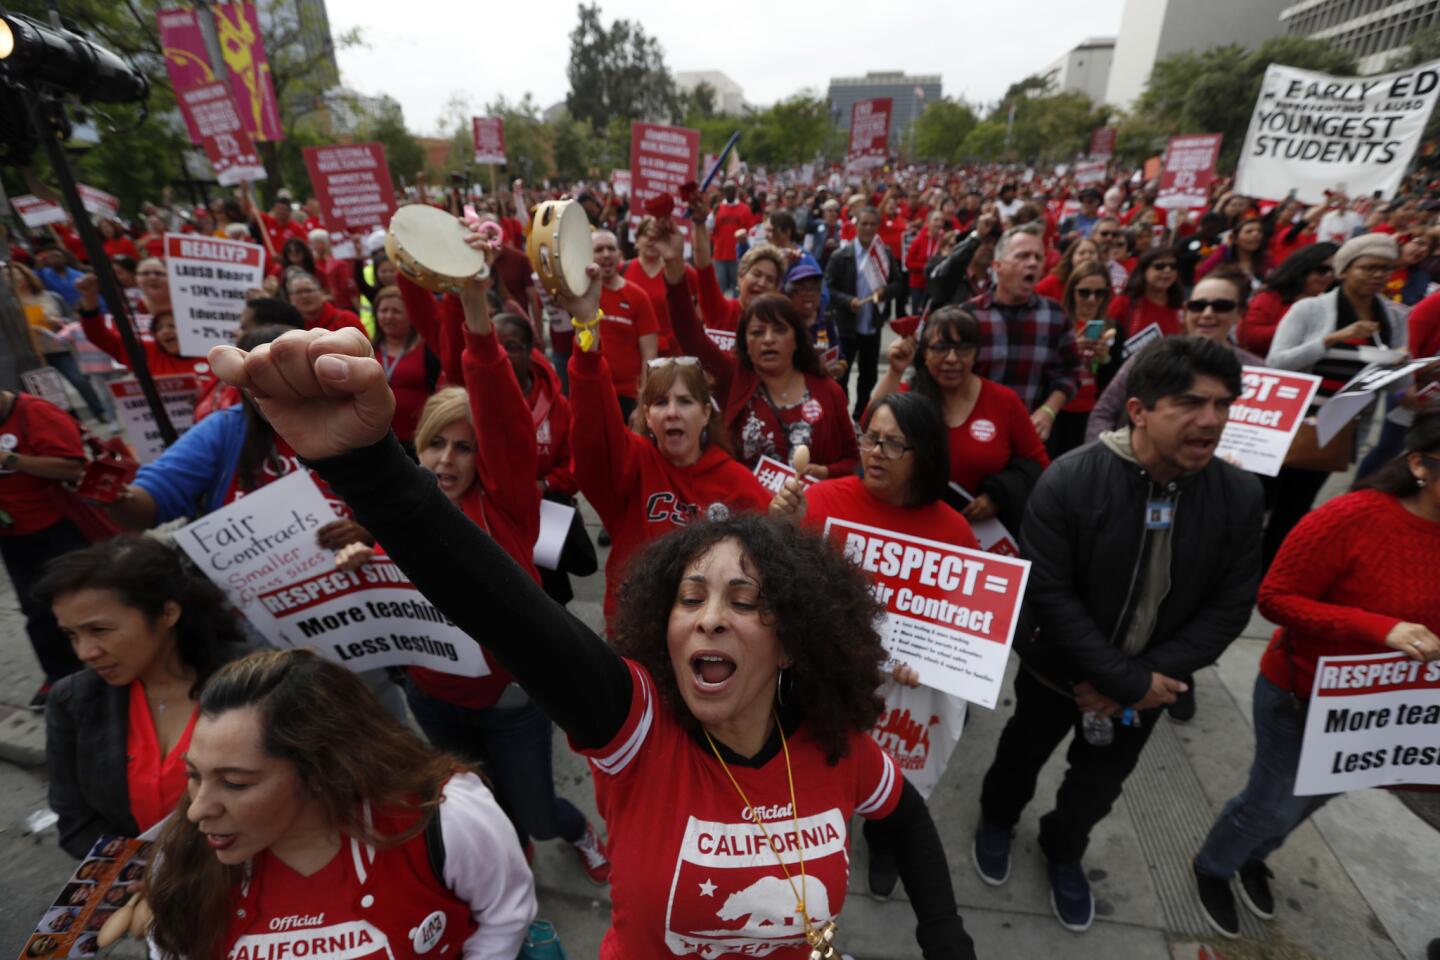 L.A Unified teachers shout during a union rally Thursday outside Los Angeles City Hall. Contract negotiations have been long stalled.